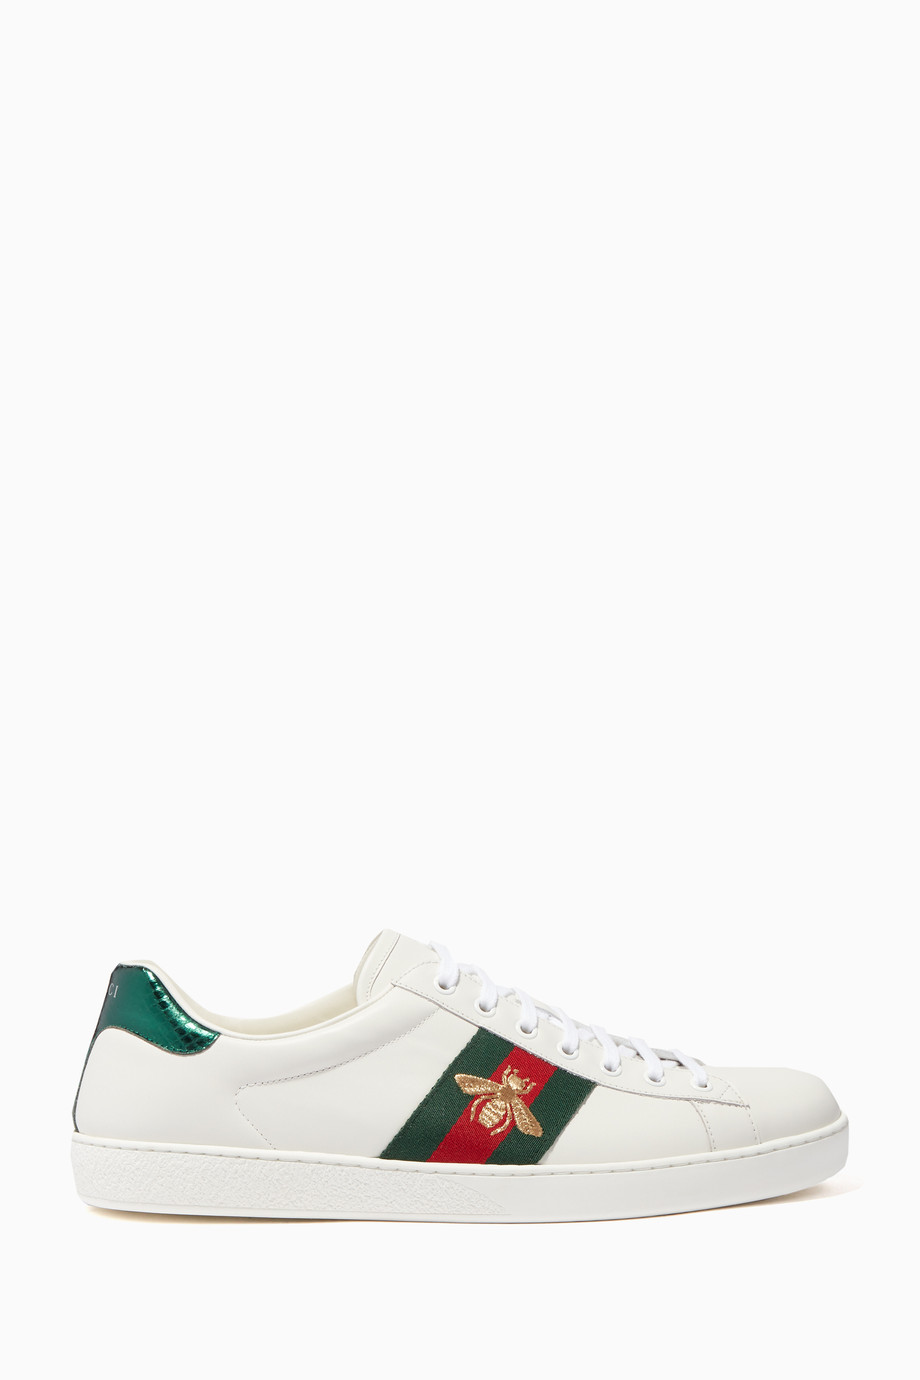 Shop Gucci White White Ace Embroidered Sneakers for Men | Ounass UAE